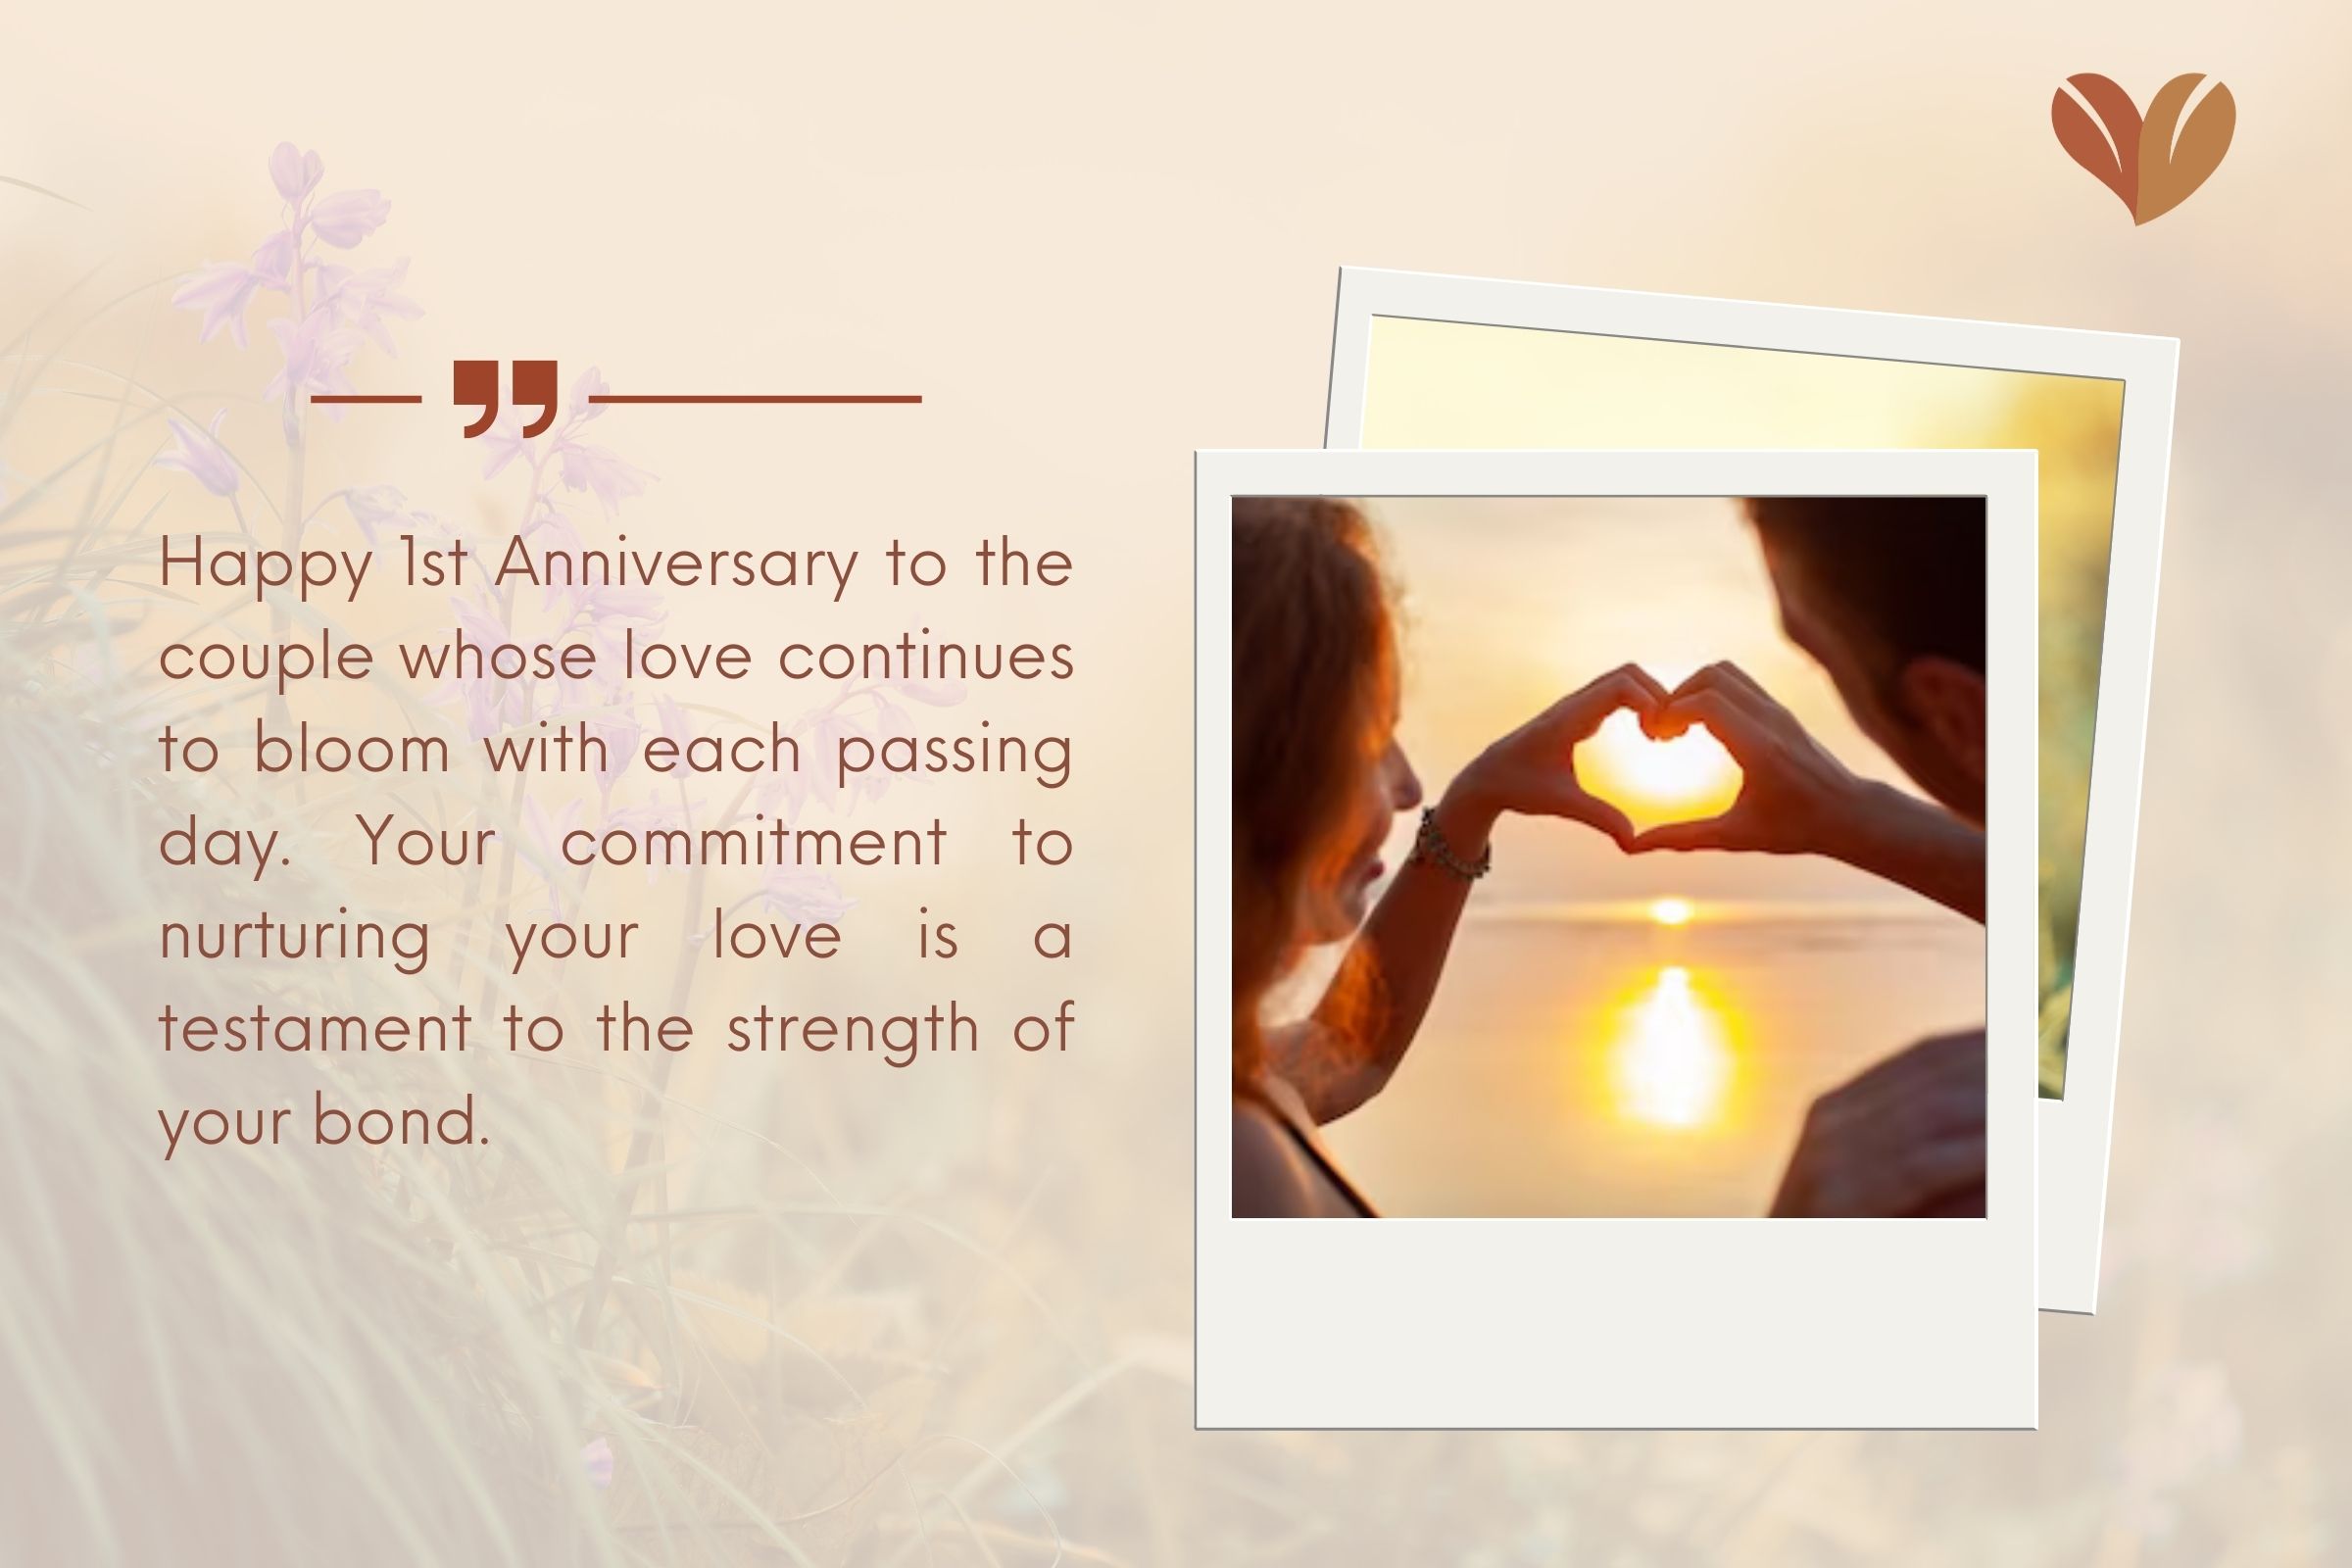 Happy 1st anniversary wishes for couple